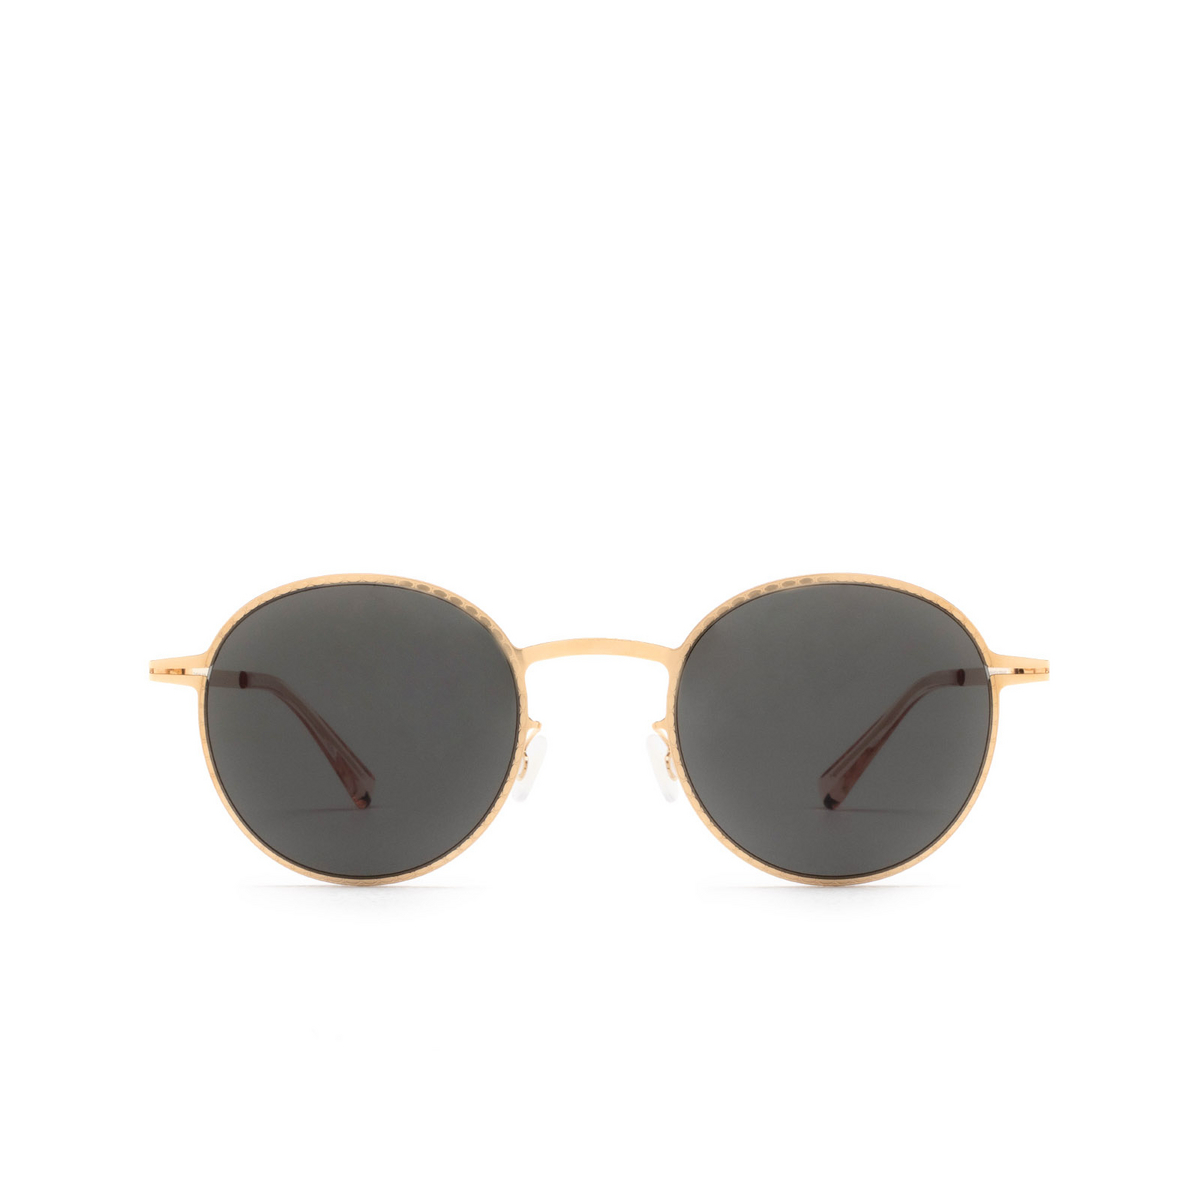 Mykita® Round Sunglasses: Nis color 291 Champagne Gold - front view